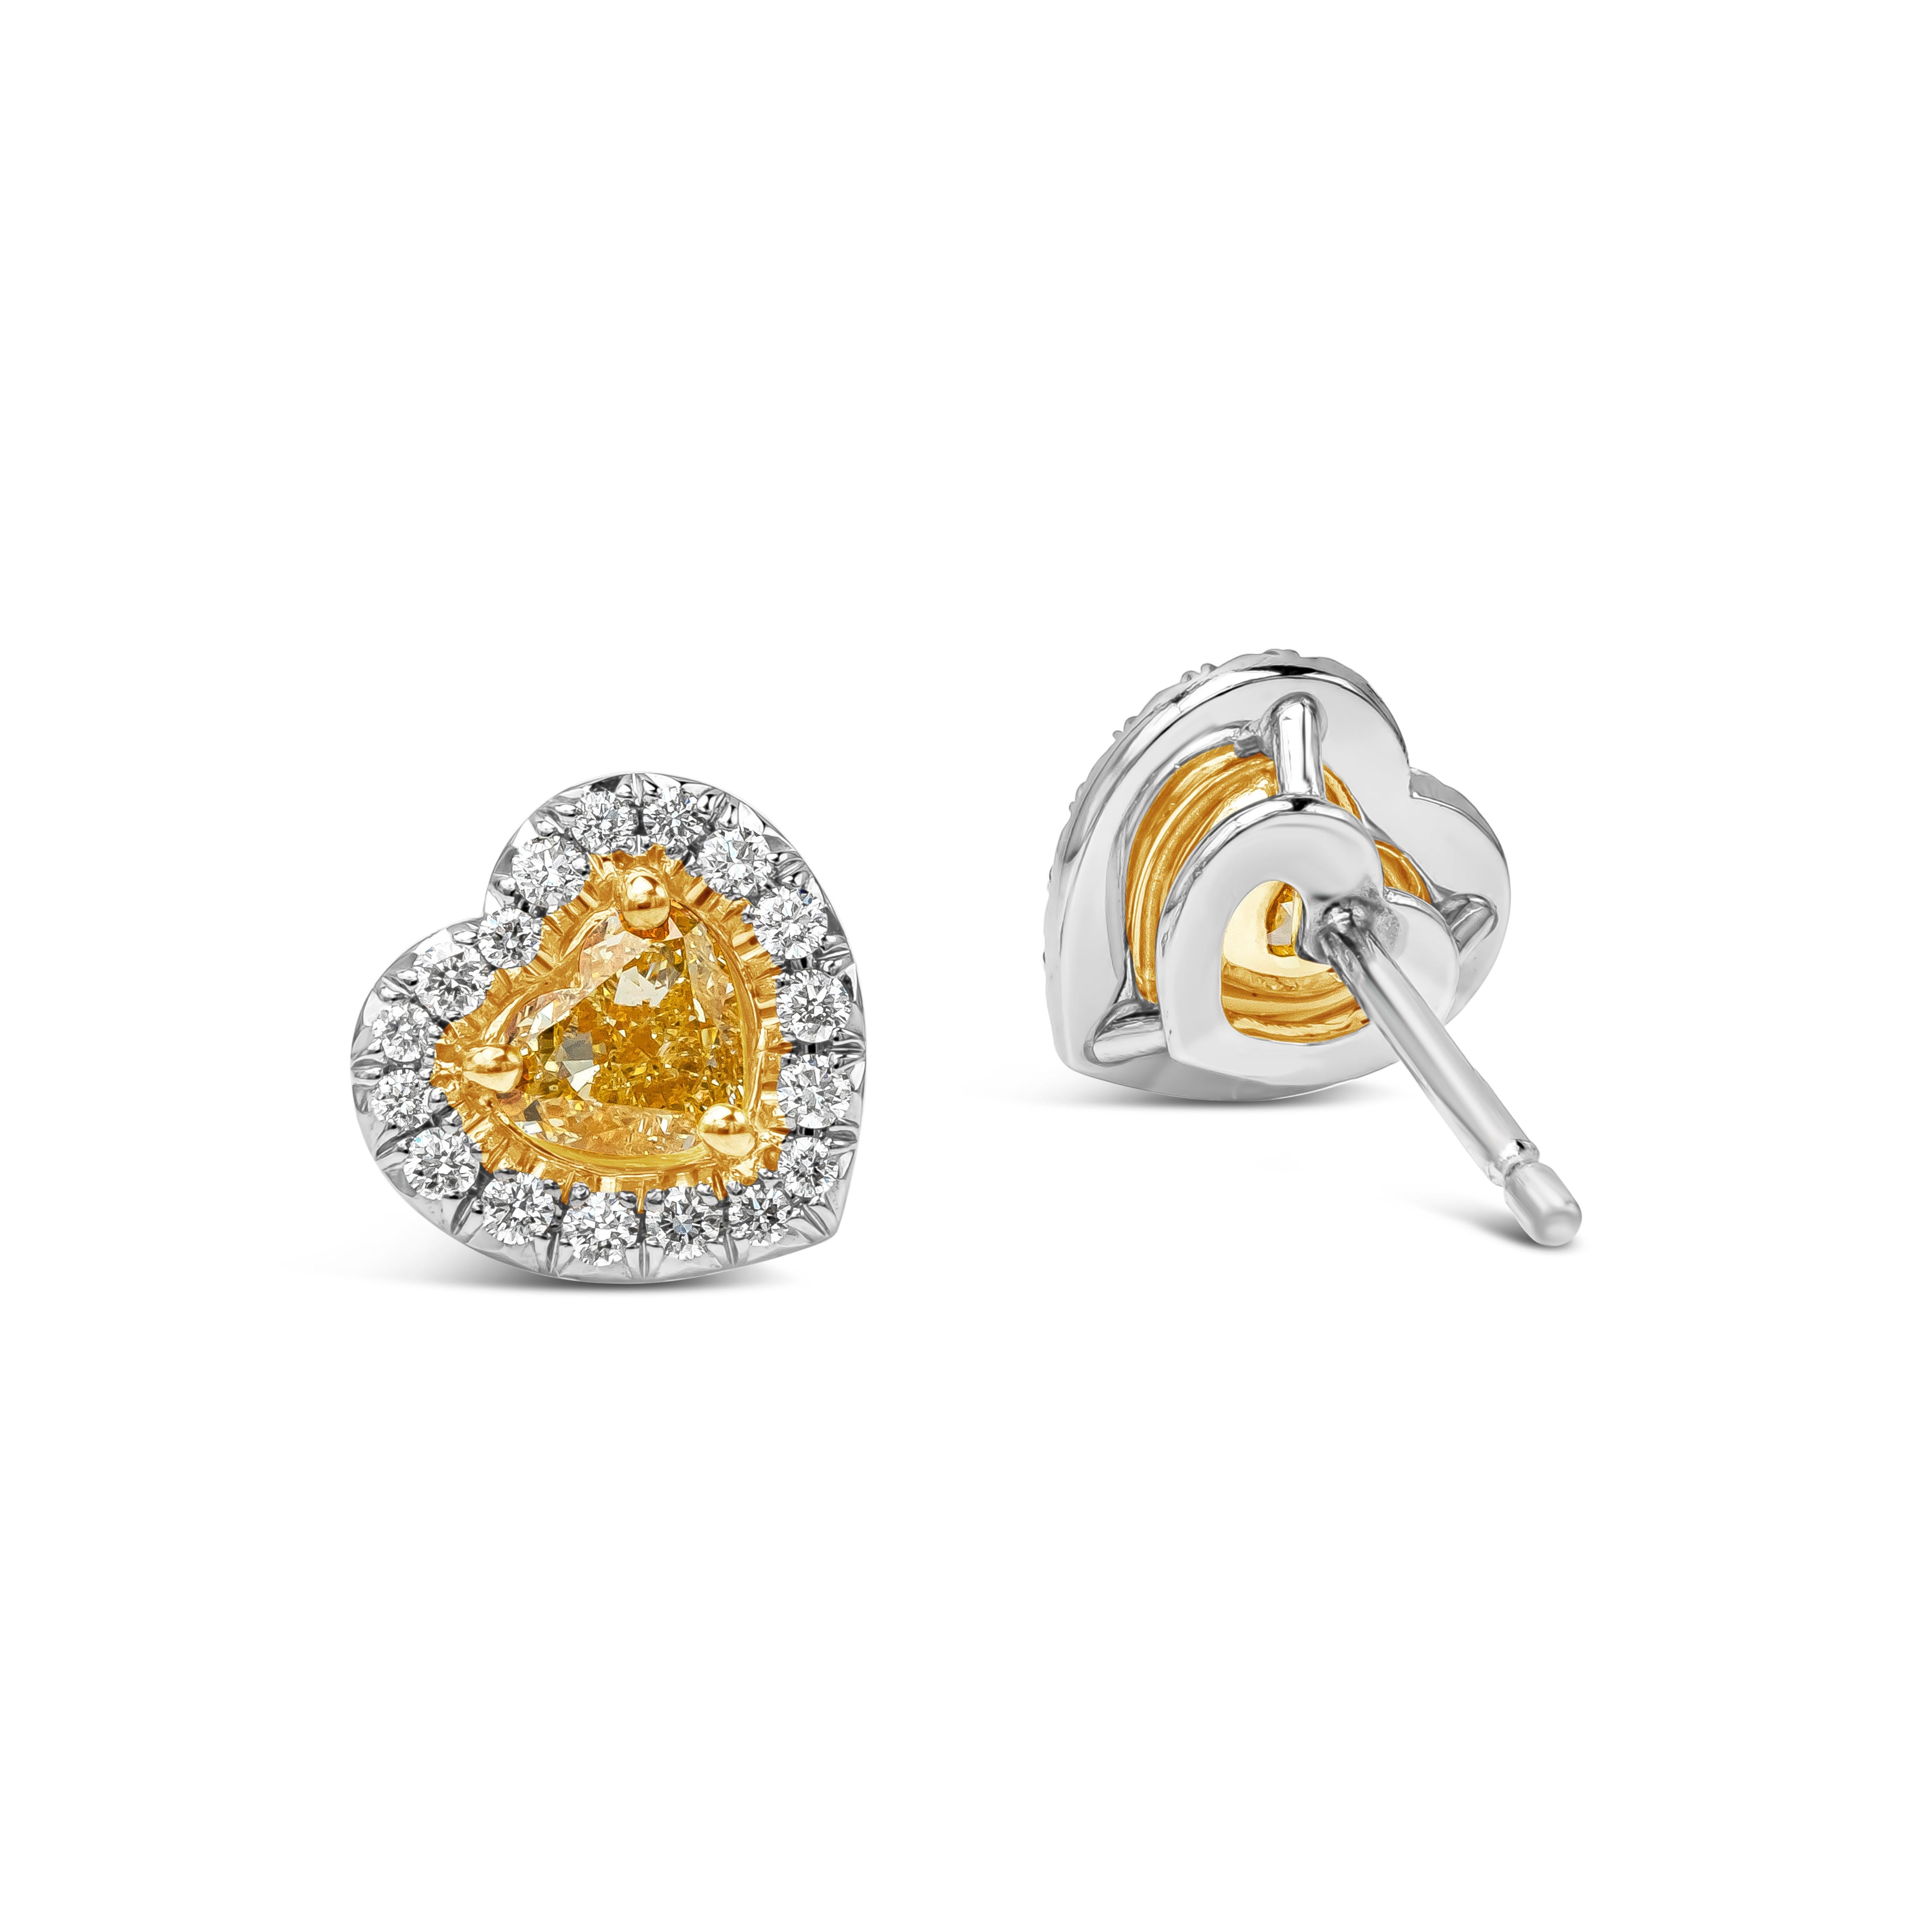 A simple and unique pair of stud earrings showcasing vibrant 0.69 carats total heart shape fancy yellow diamond surrounded by a single row of brilliant round diamonds weighing 0.20 carats total , F Color and VS in Clarity. Finely made in 18k yellow